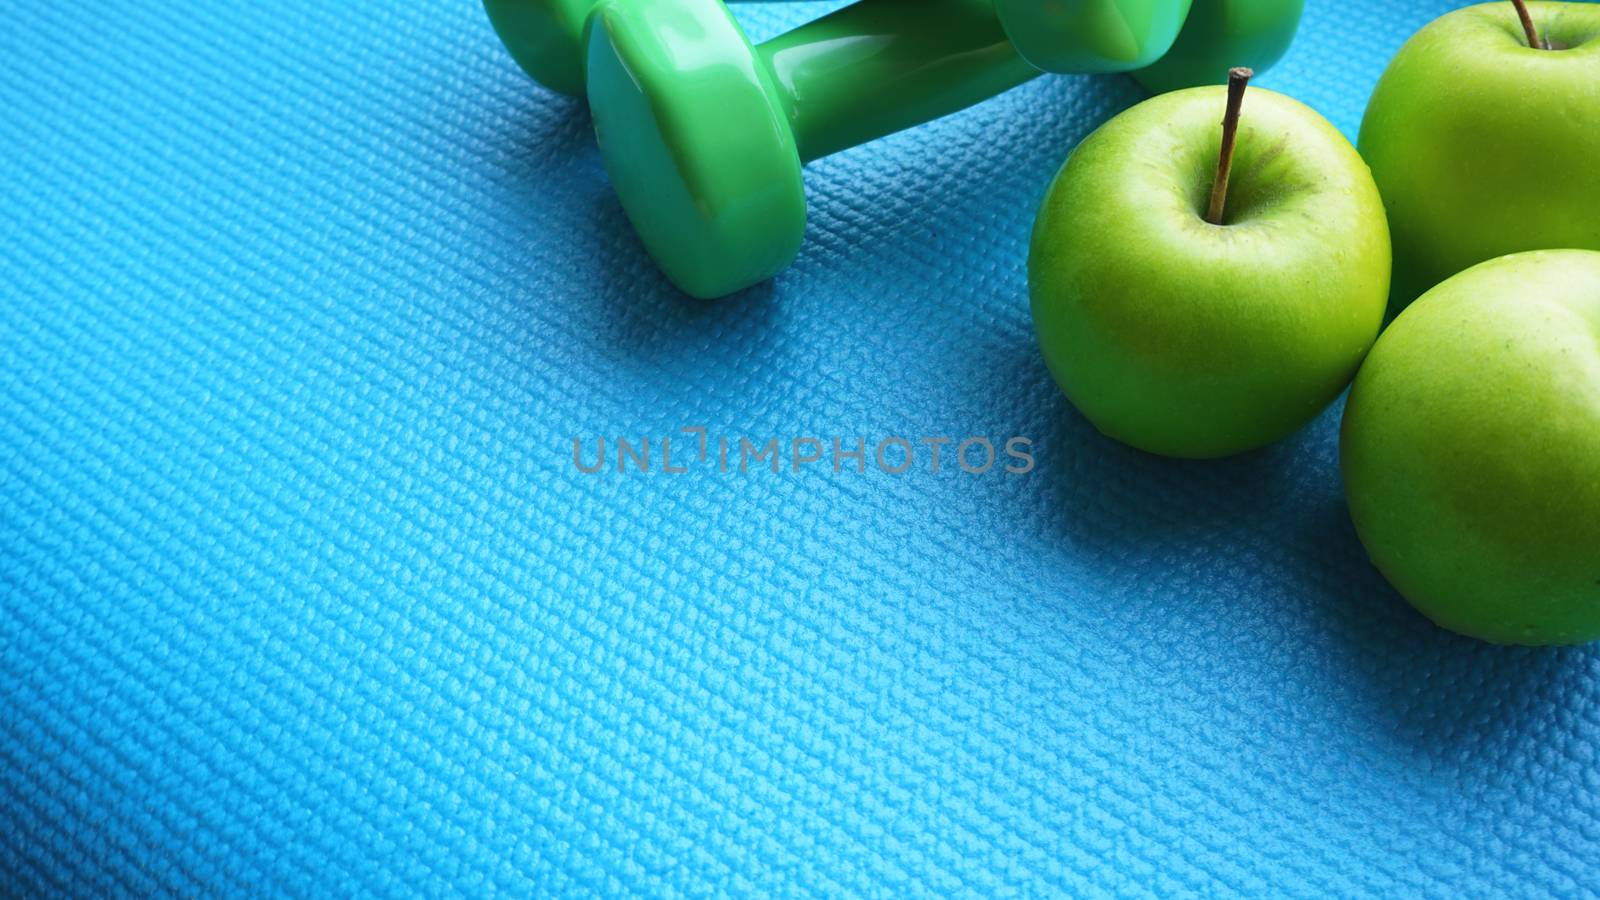 Dumbbells near green apples on blue background. Healthy lifestyle and sports concept. Apple fruit and green barbells. Health regime and fitness symbols